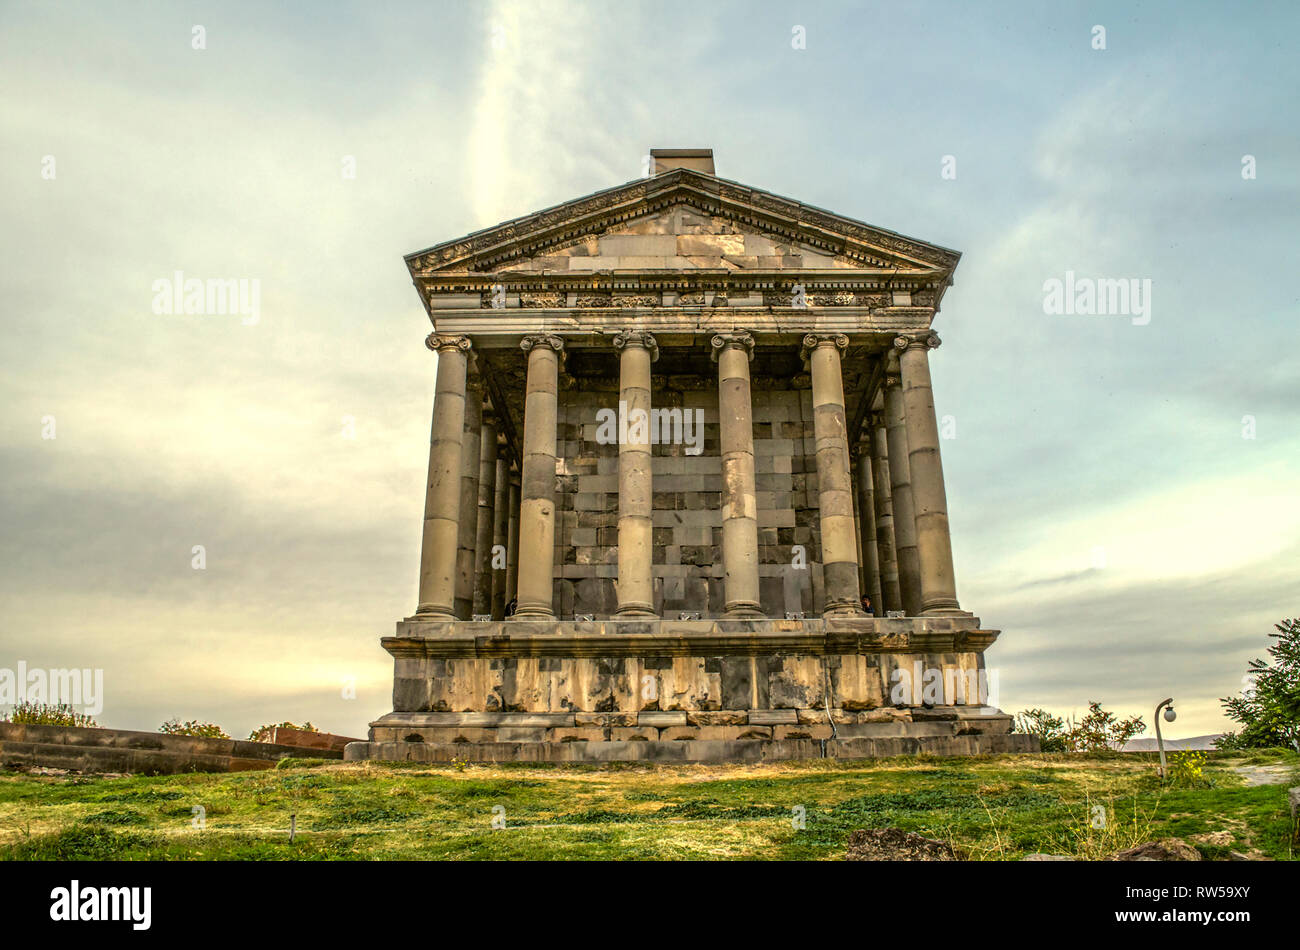 The reverse side of the medieval pagan temple, built in honor of the Sun God Mithras in the village of Garni, located near Yerevan Stock Photo